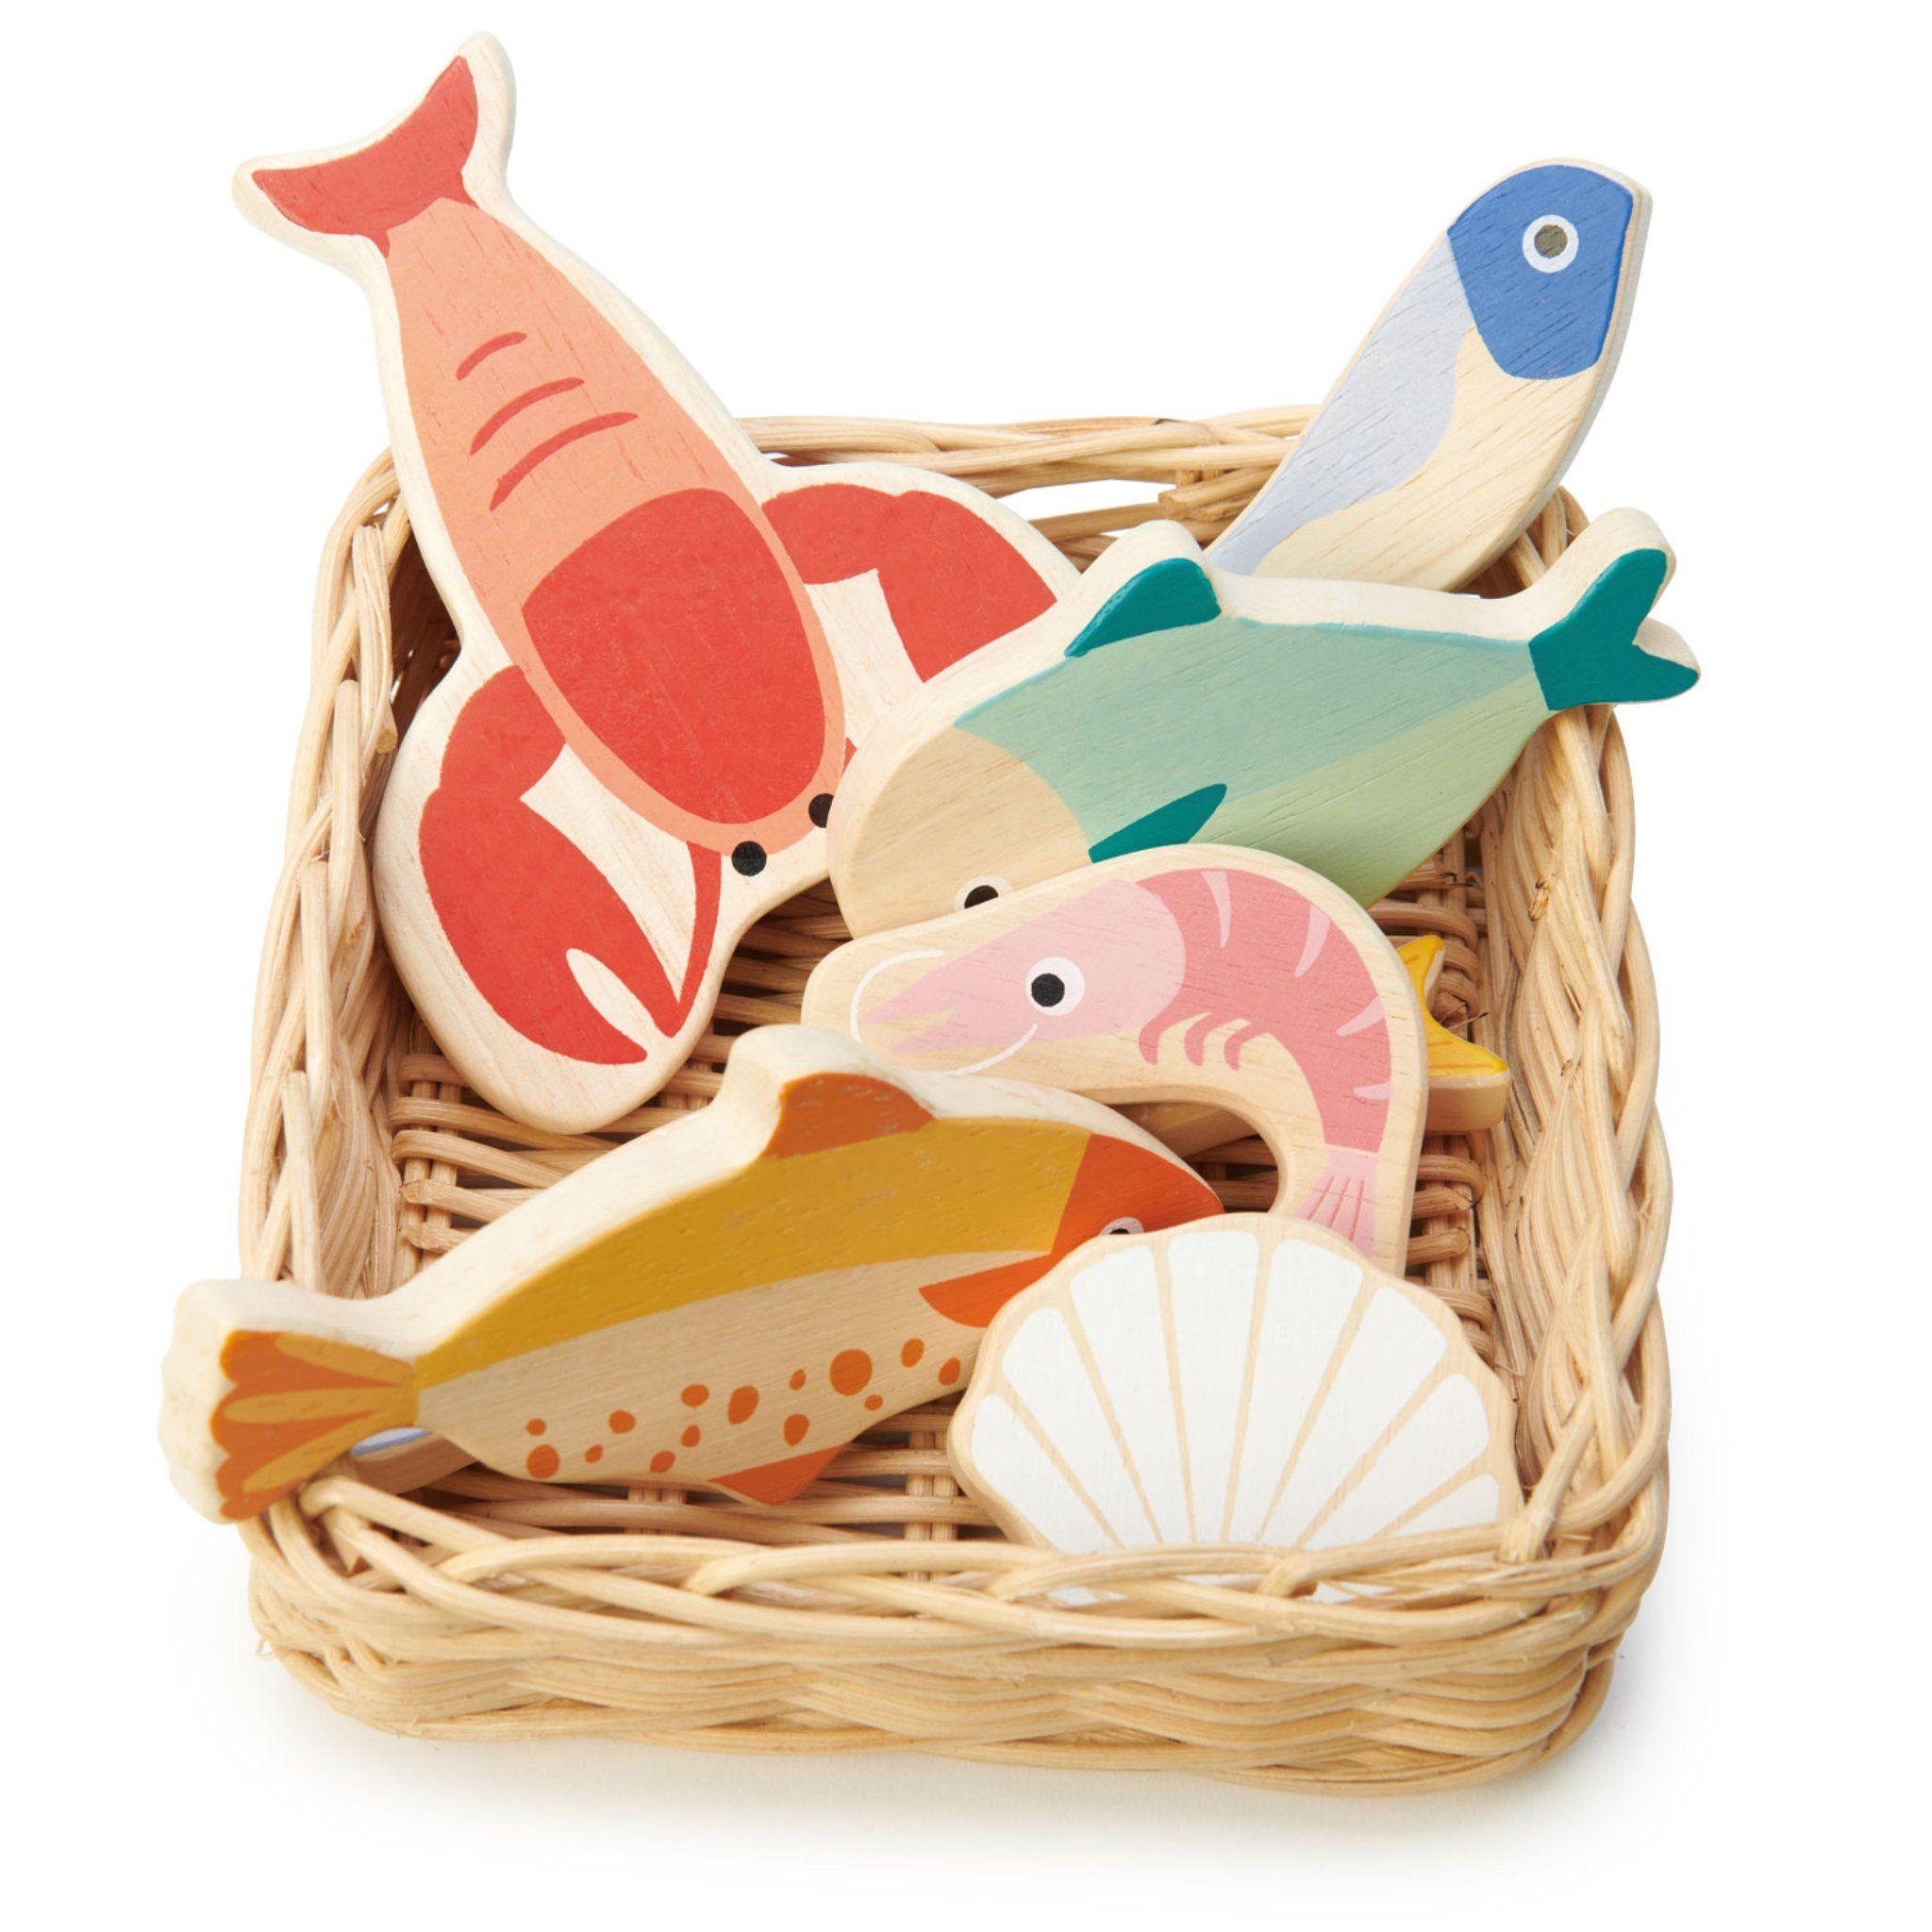 Tender Leaf Toys: Wicker basket with fish and seafood Seafood Basket